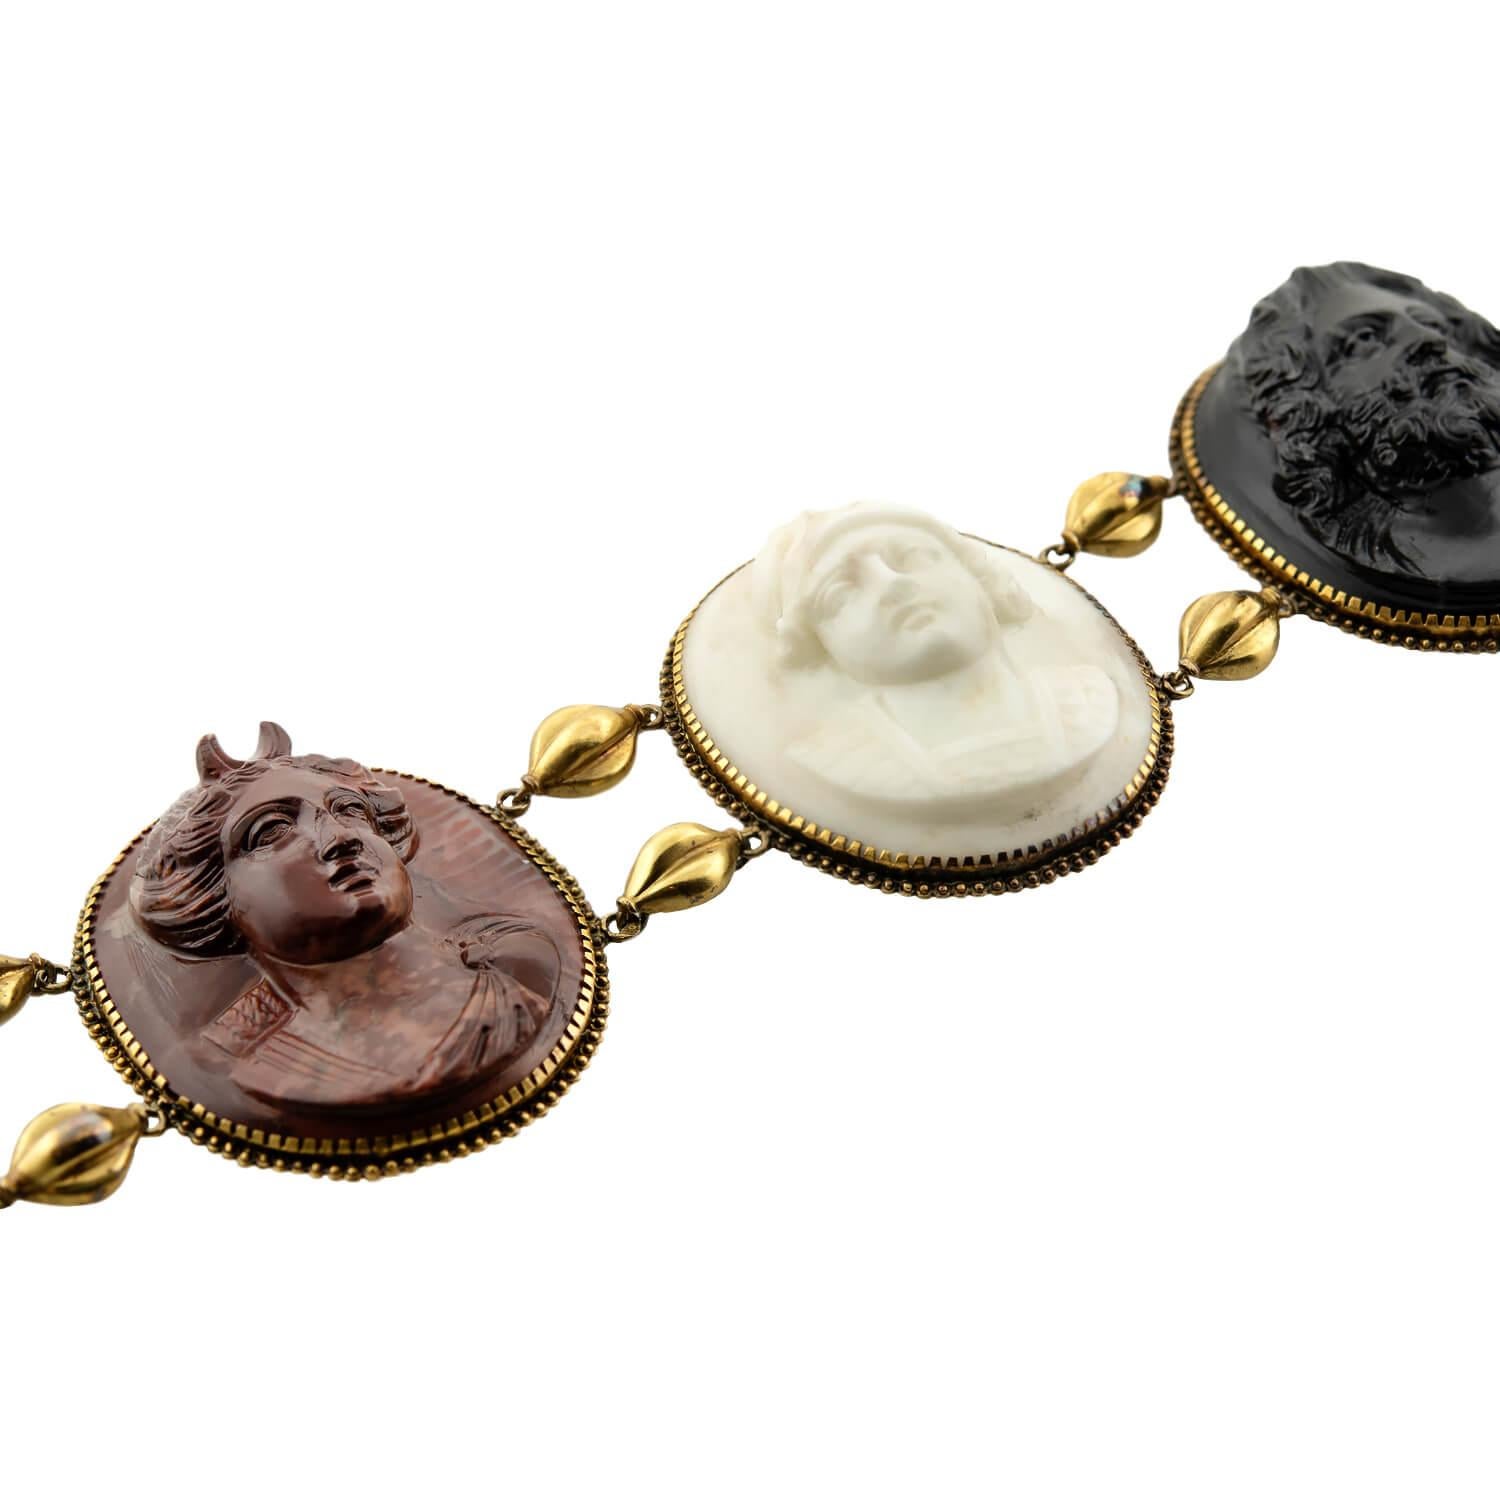 This gorgeous hand carved lava bracelet is from the Victorian (ca1880) era! The 18k yellow gold bracelet is bezel-set with five exquisitely carved in high relief cameos from Mount Vesuvius lavas. The cameos feature deities (Artemis, Ares, Zeus,